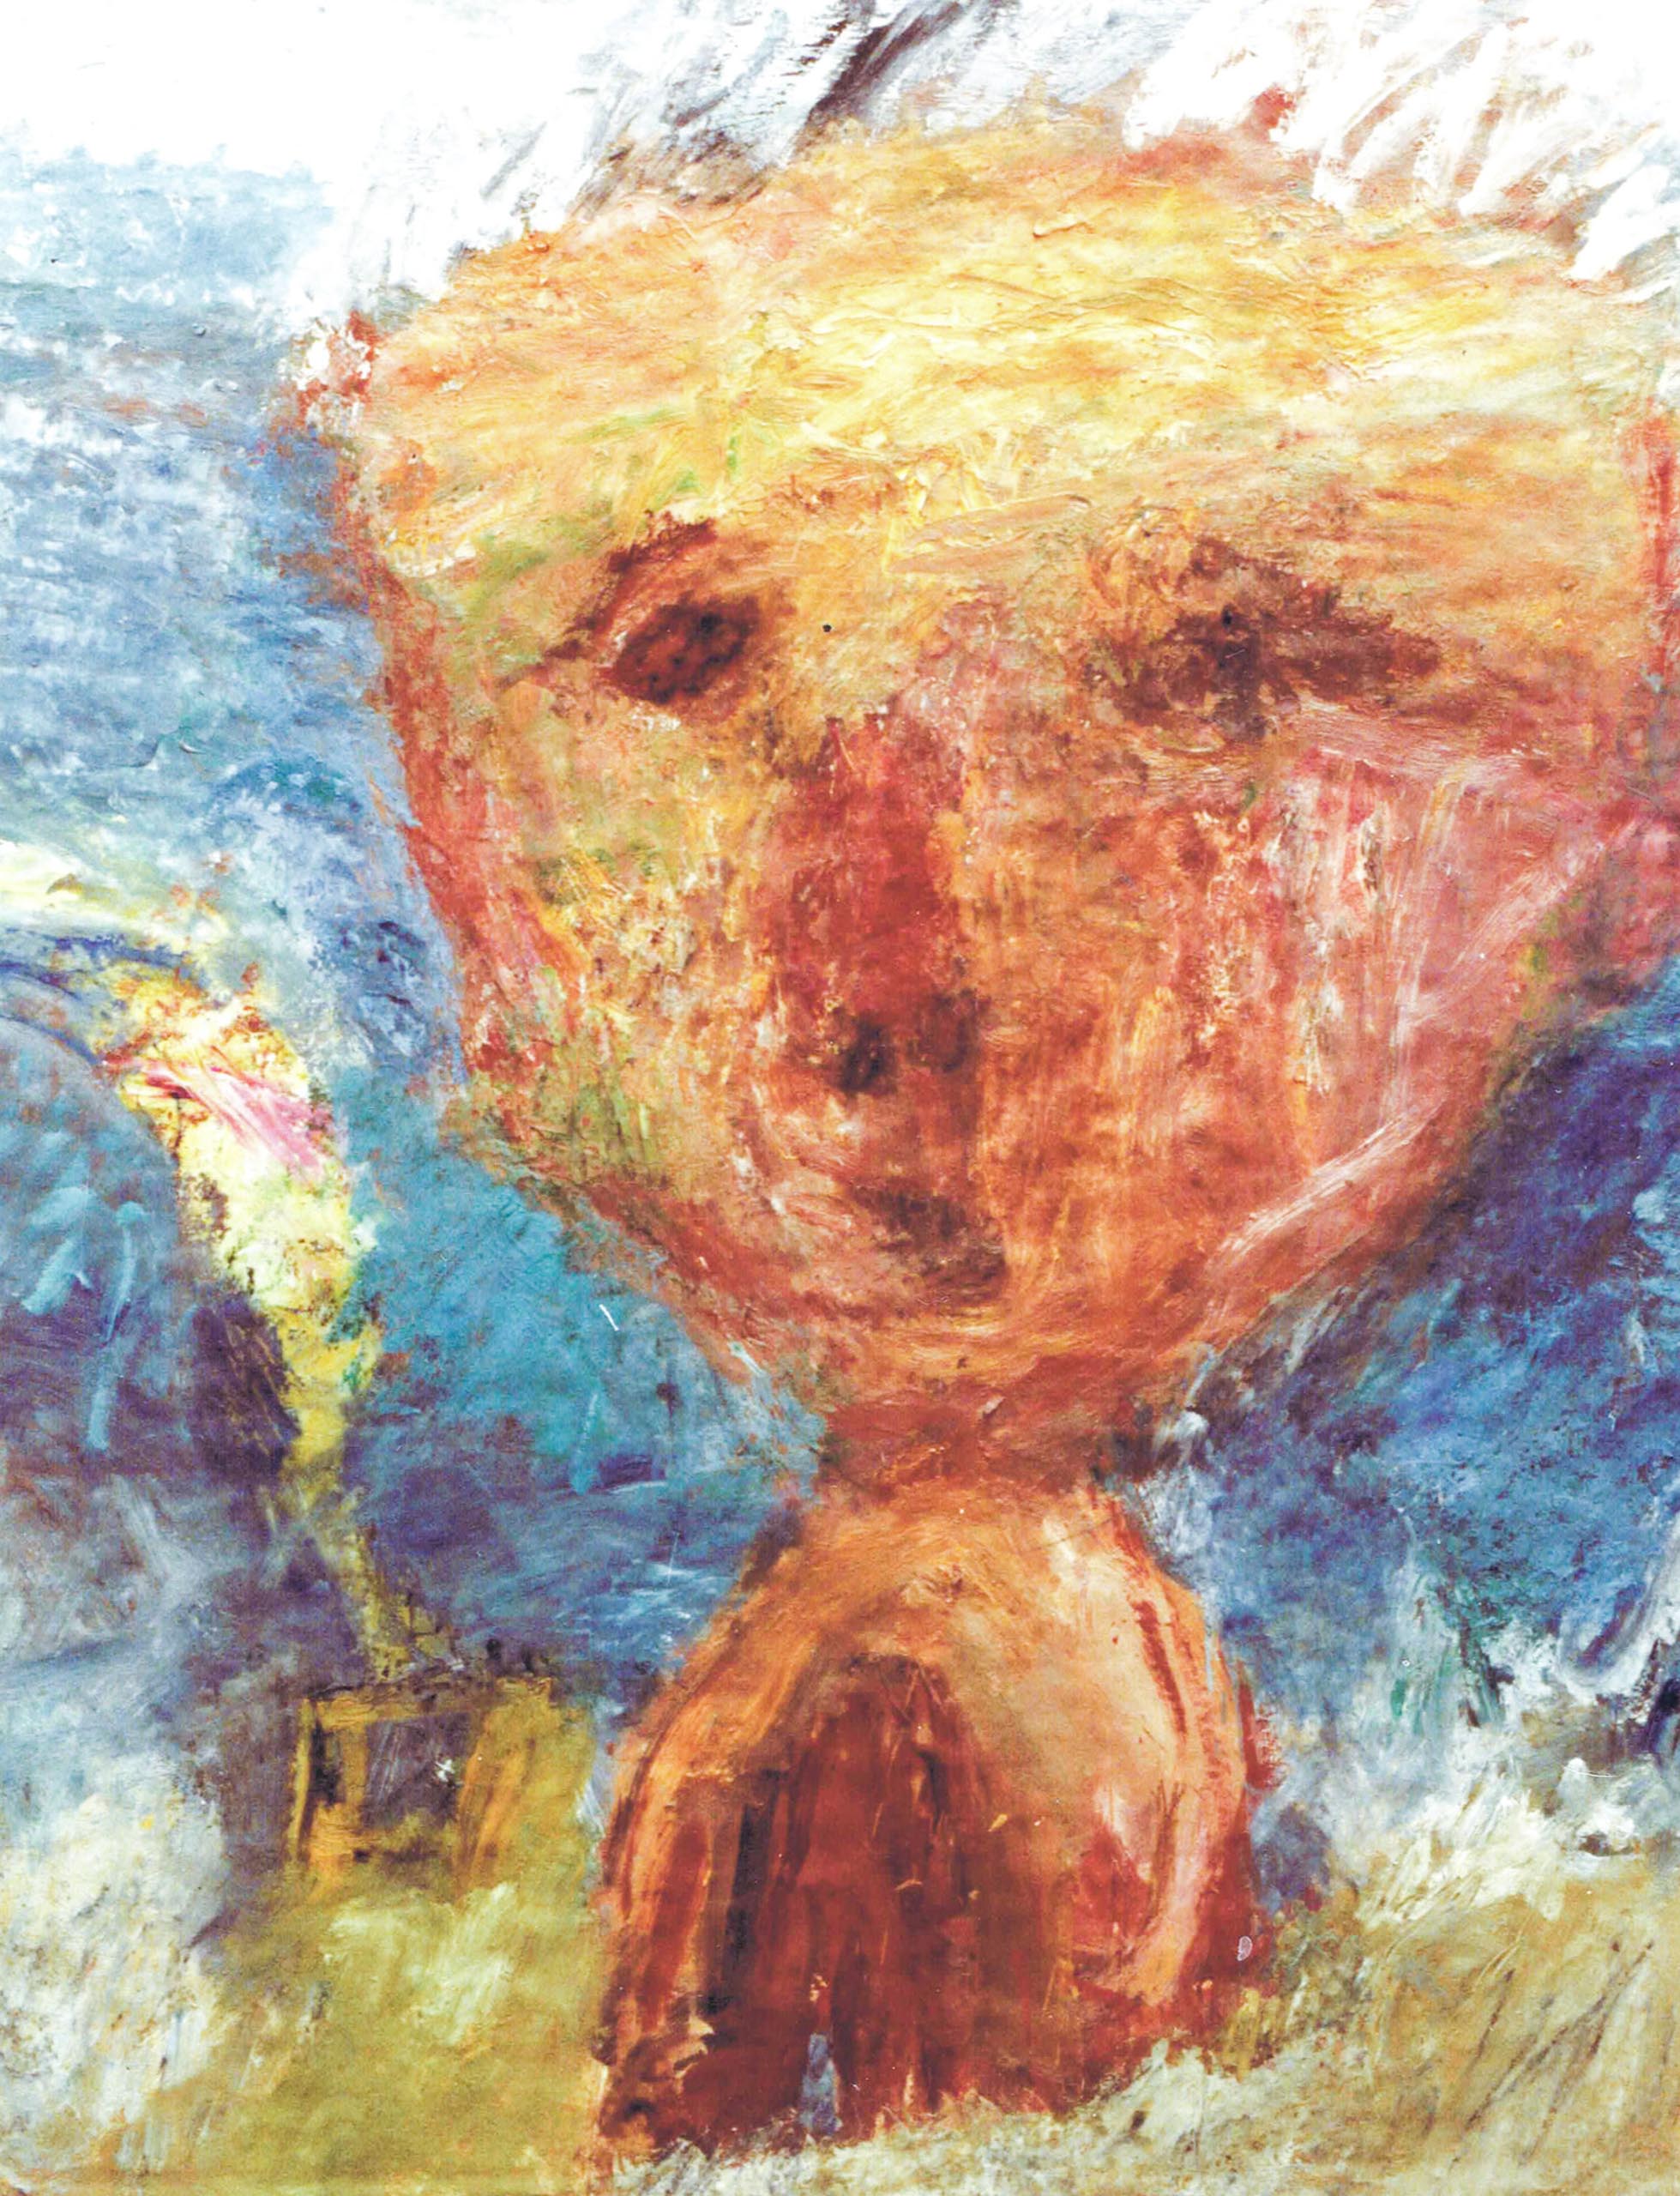 Head of a goddess1982, Oil on paper on canvas, 60 x 50 cm